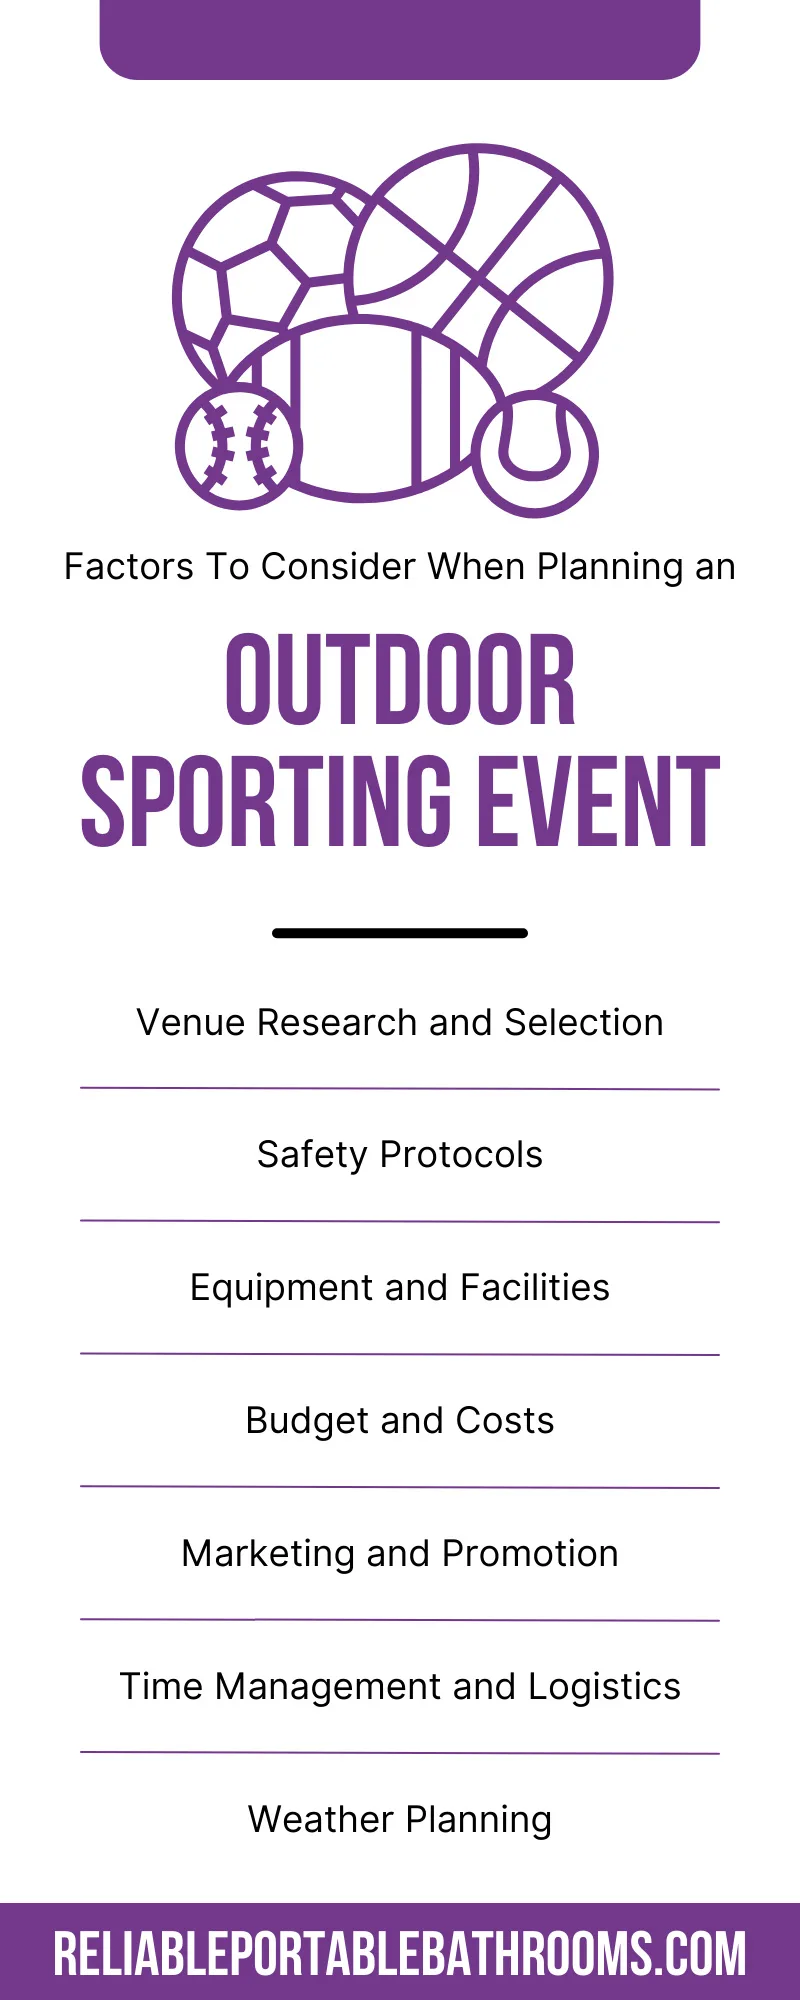 Factors To Consider When Planning an Outdoor Sporting Event